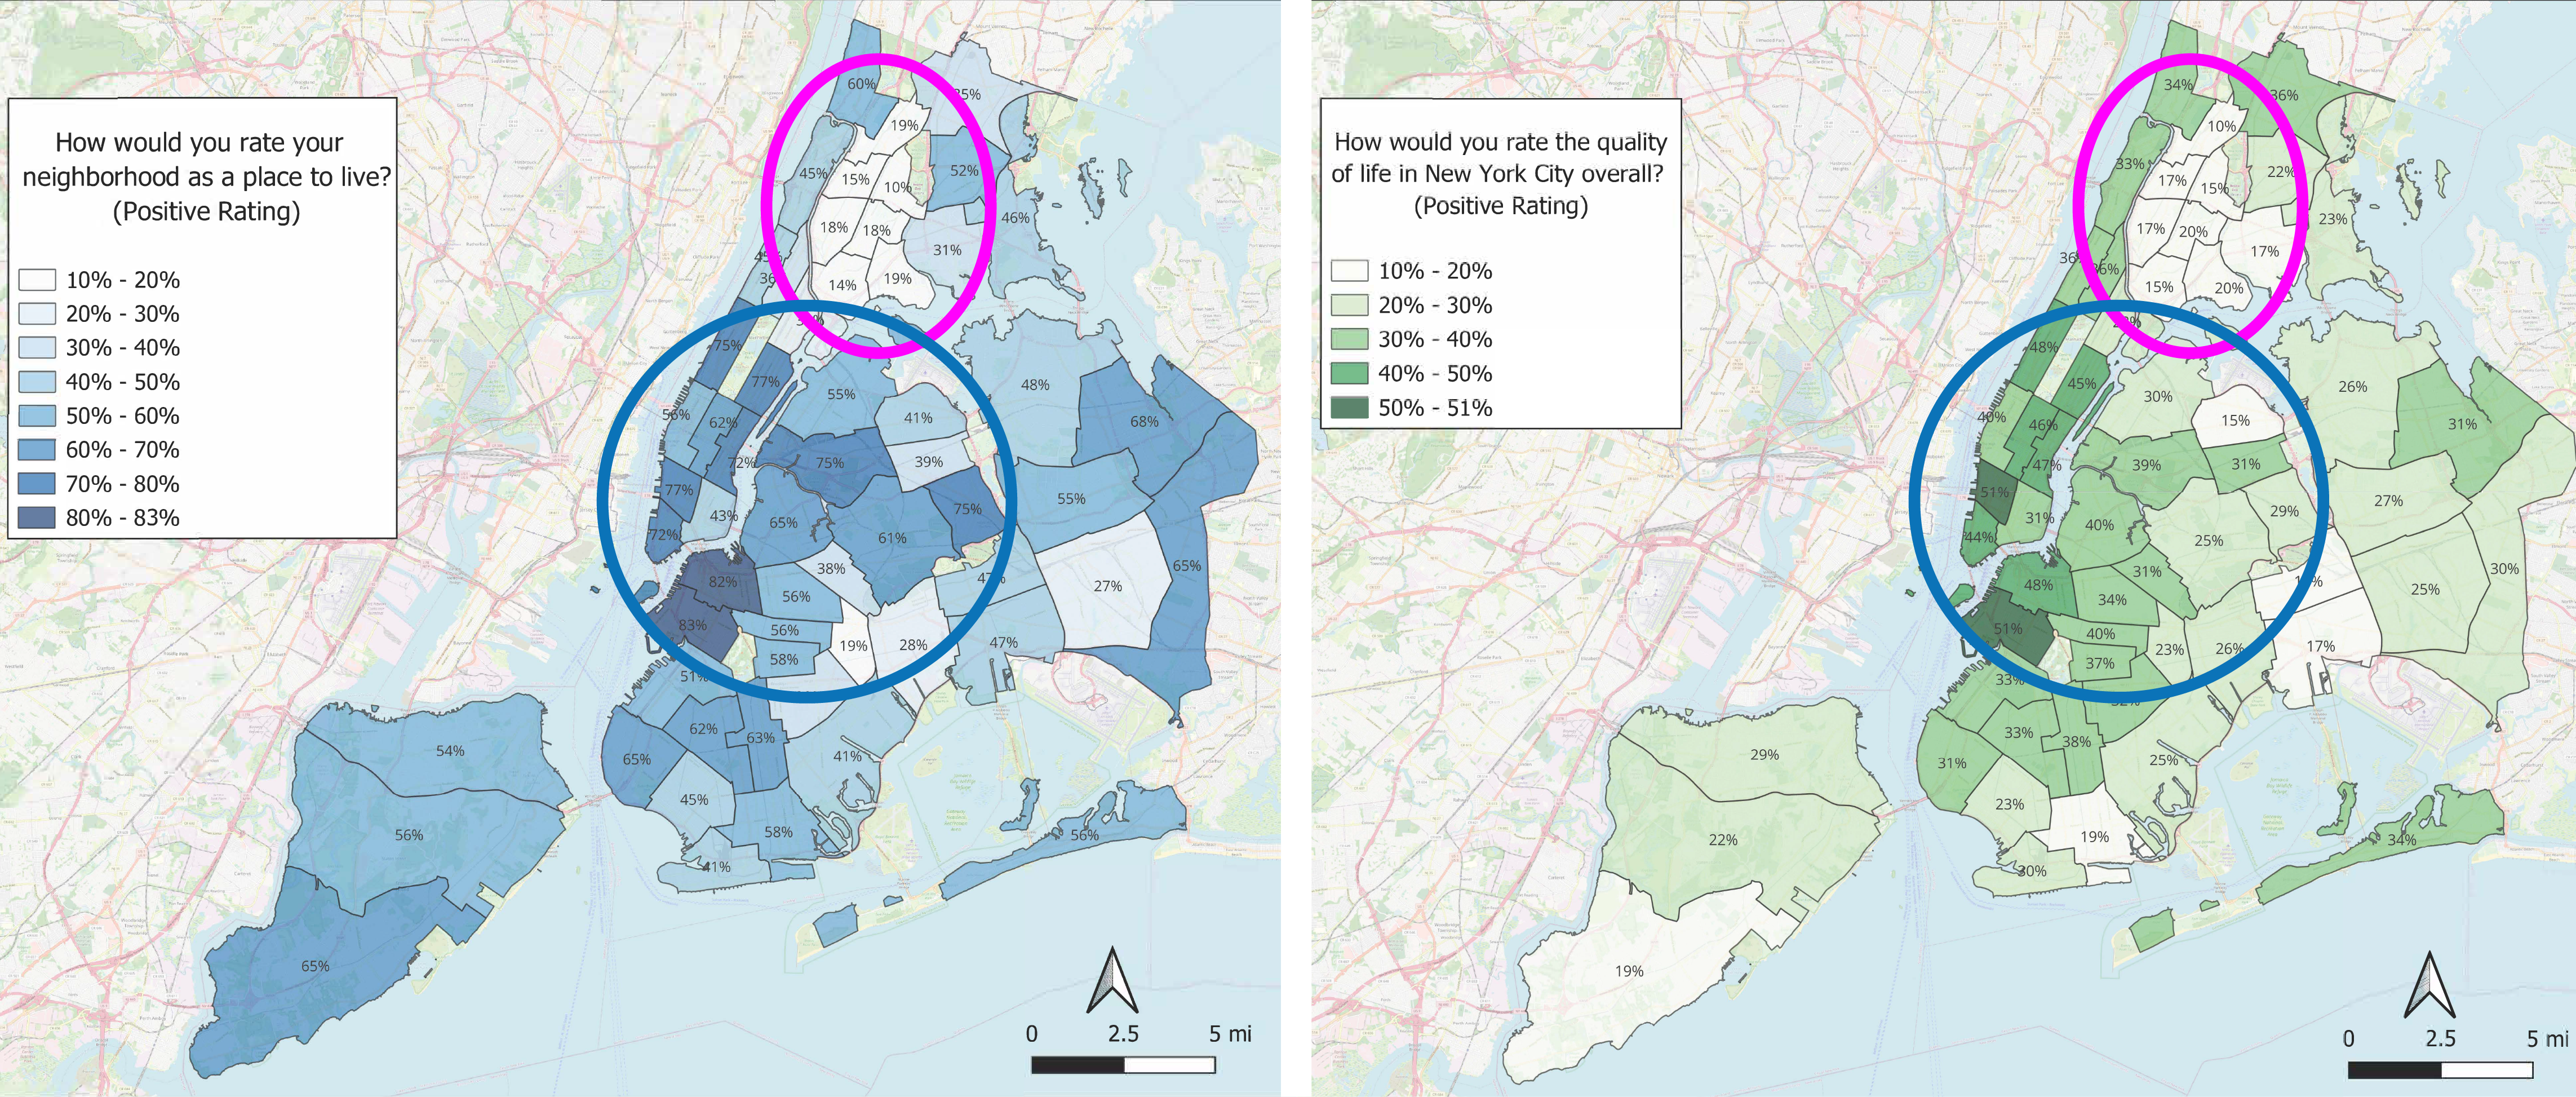 Figure 5: Shares Rating their Neighborhood and NYC As Excellent or Good, by Community Board, 2023